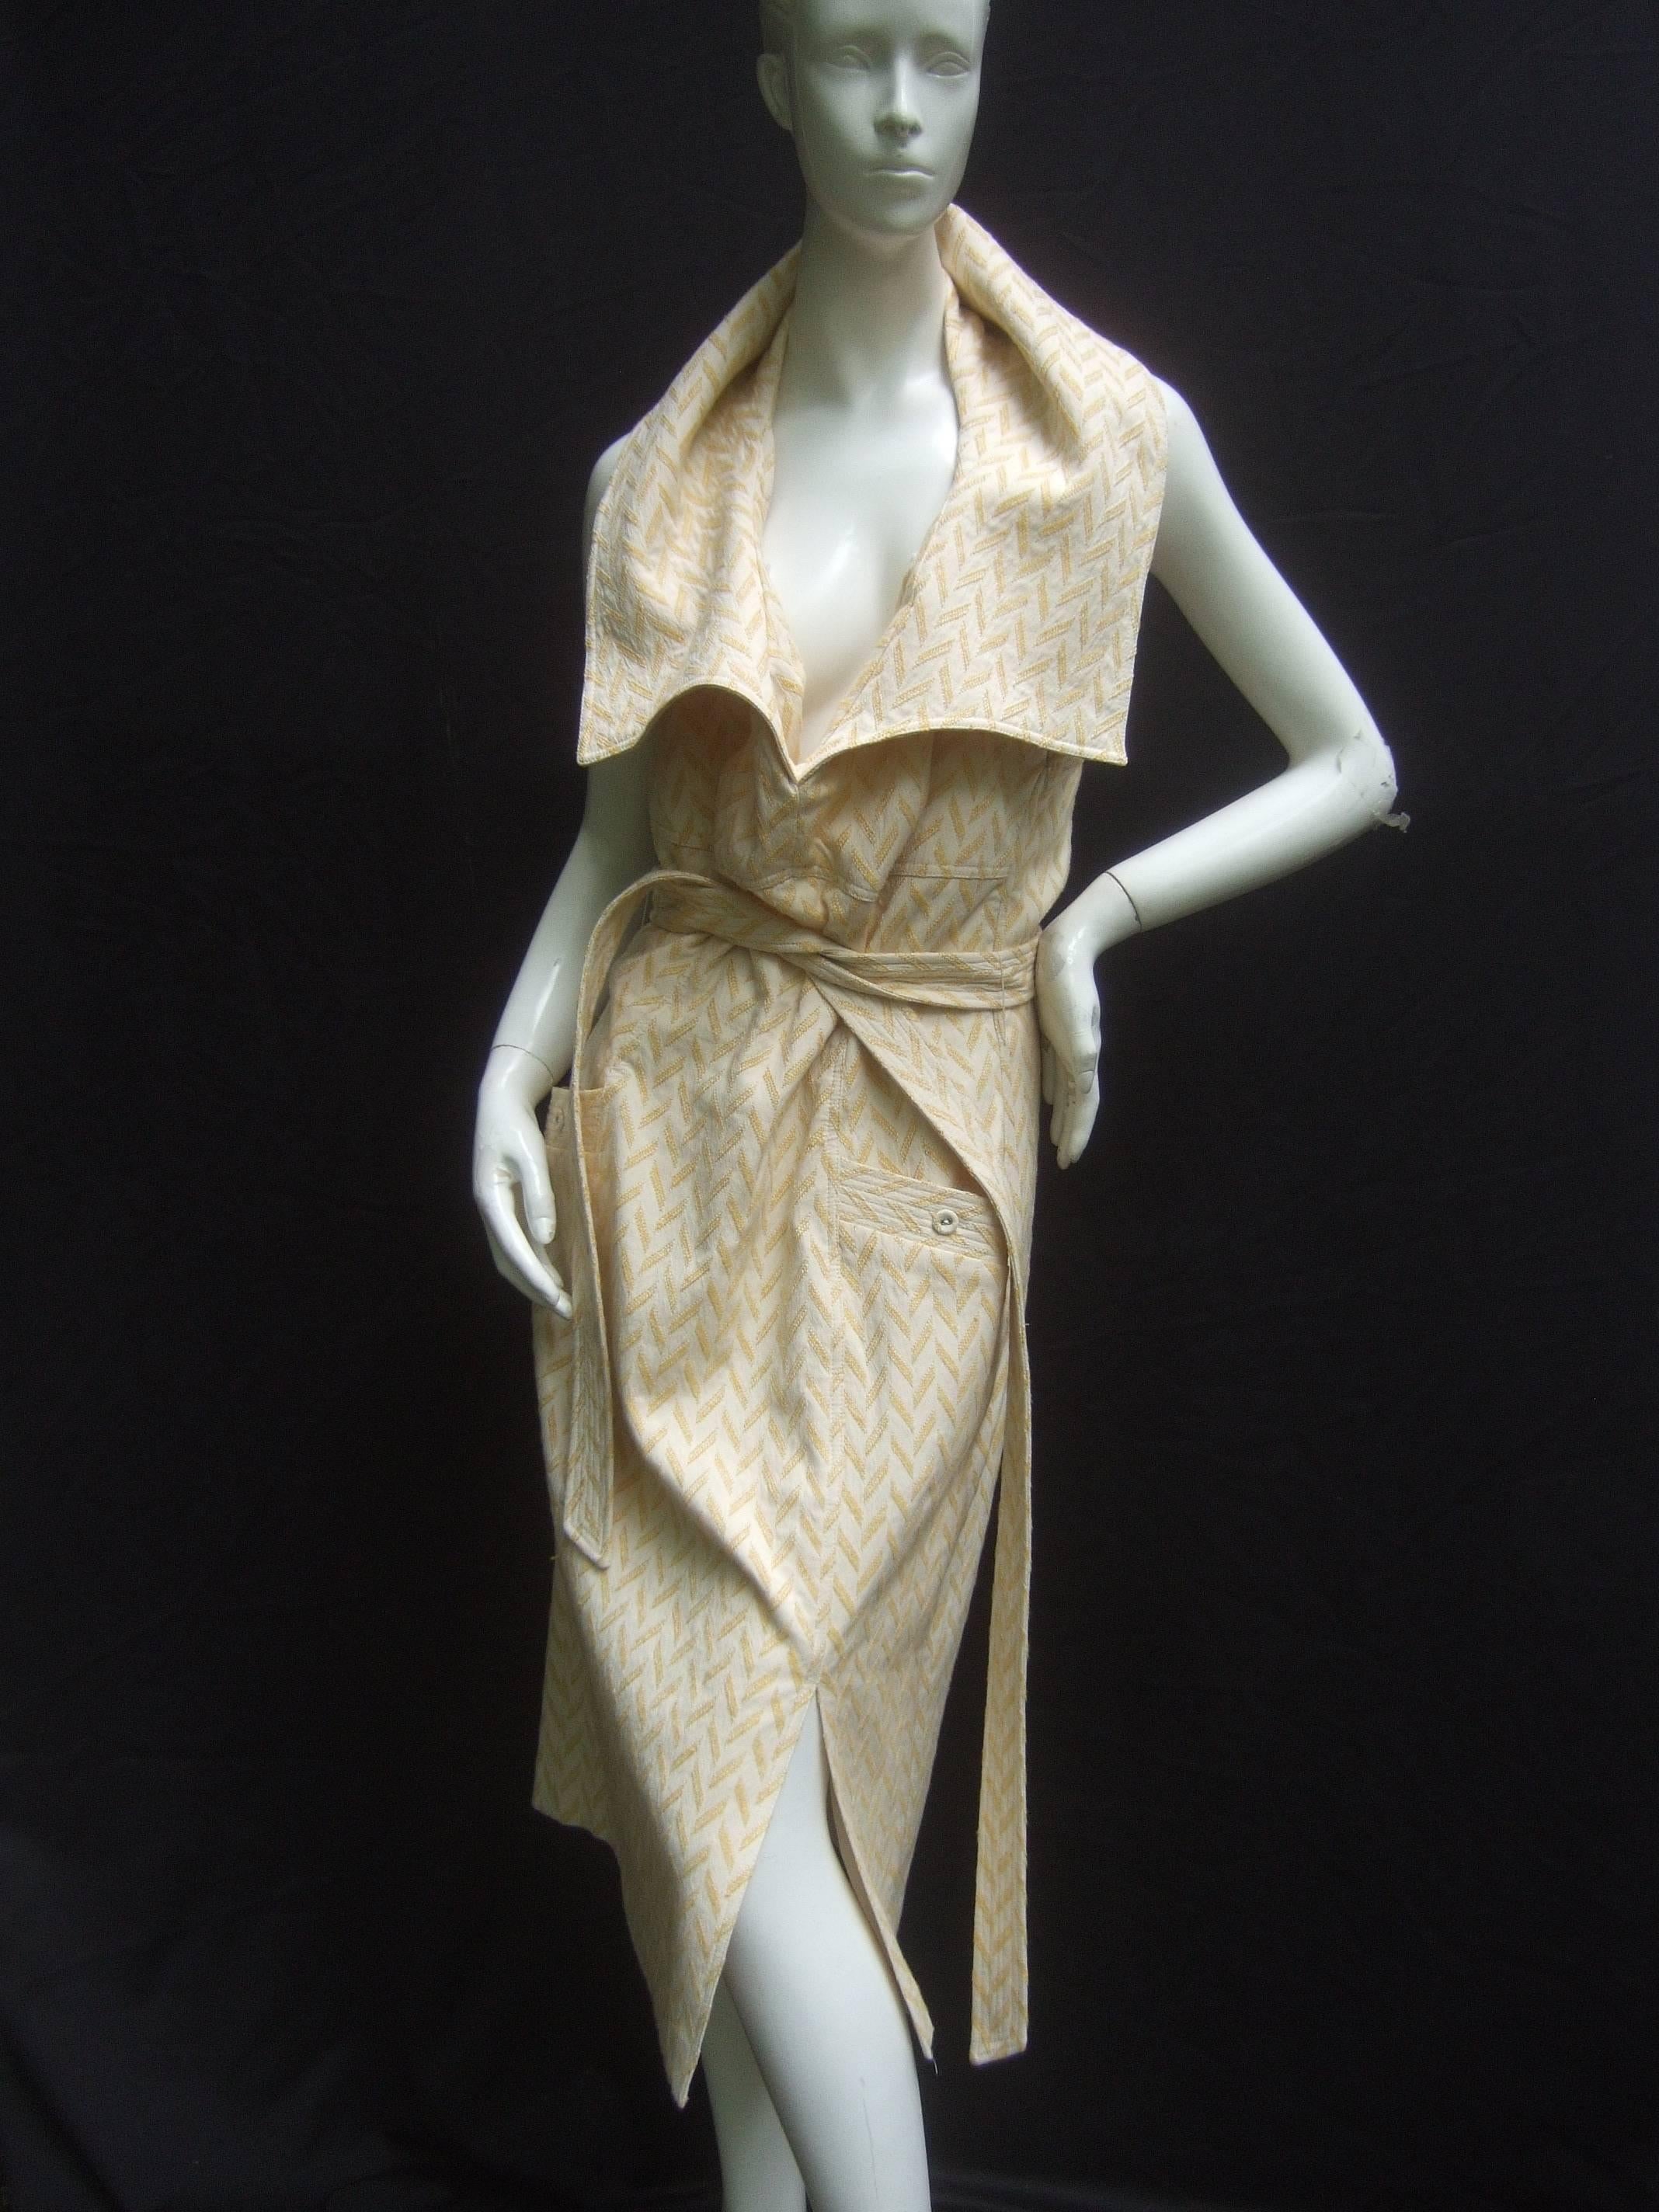 Bill Blass Chic cotton / linen print backless dress US Size 12 
The belted dress is designed with a wide exaggerated 
collar. The back is exposed which creates a dramatic 
silhouette 

The crisp dress is designed with a plunging deep v